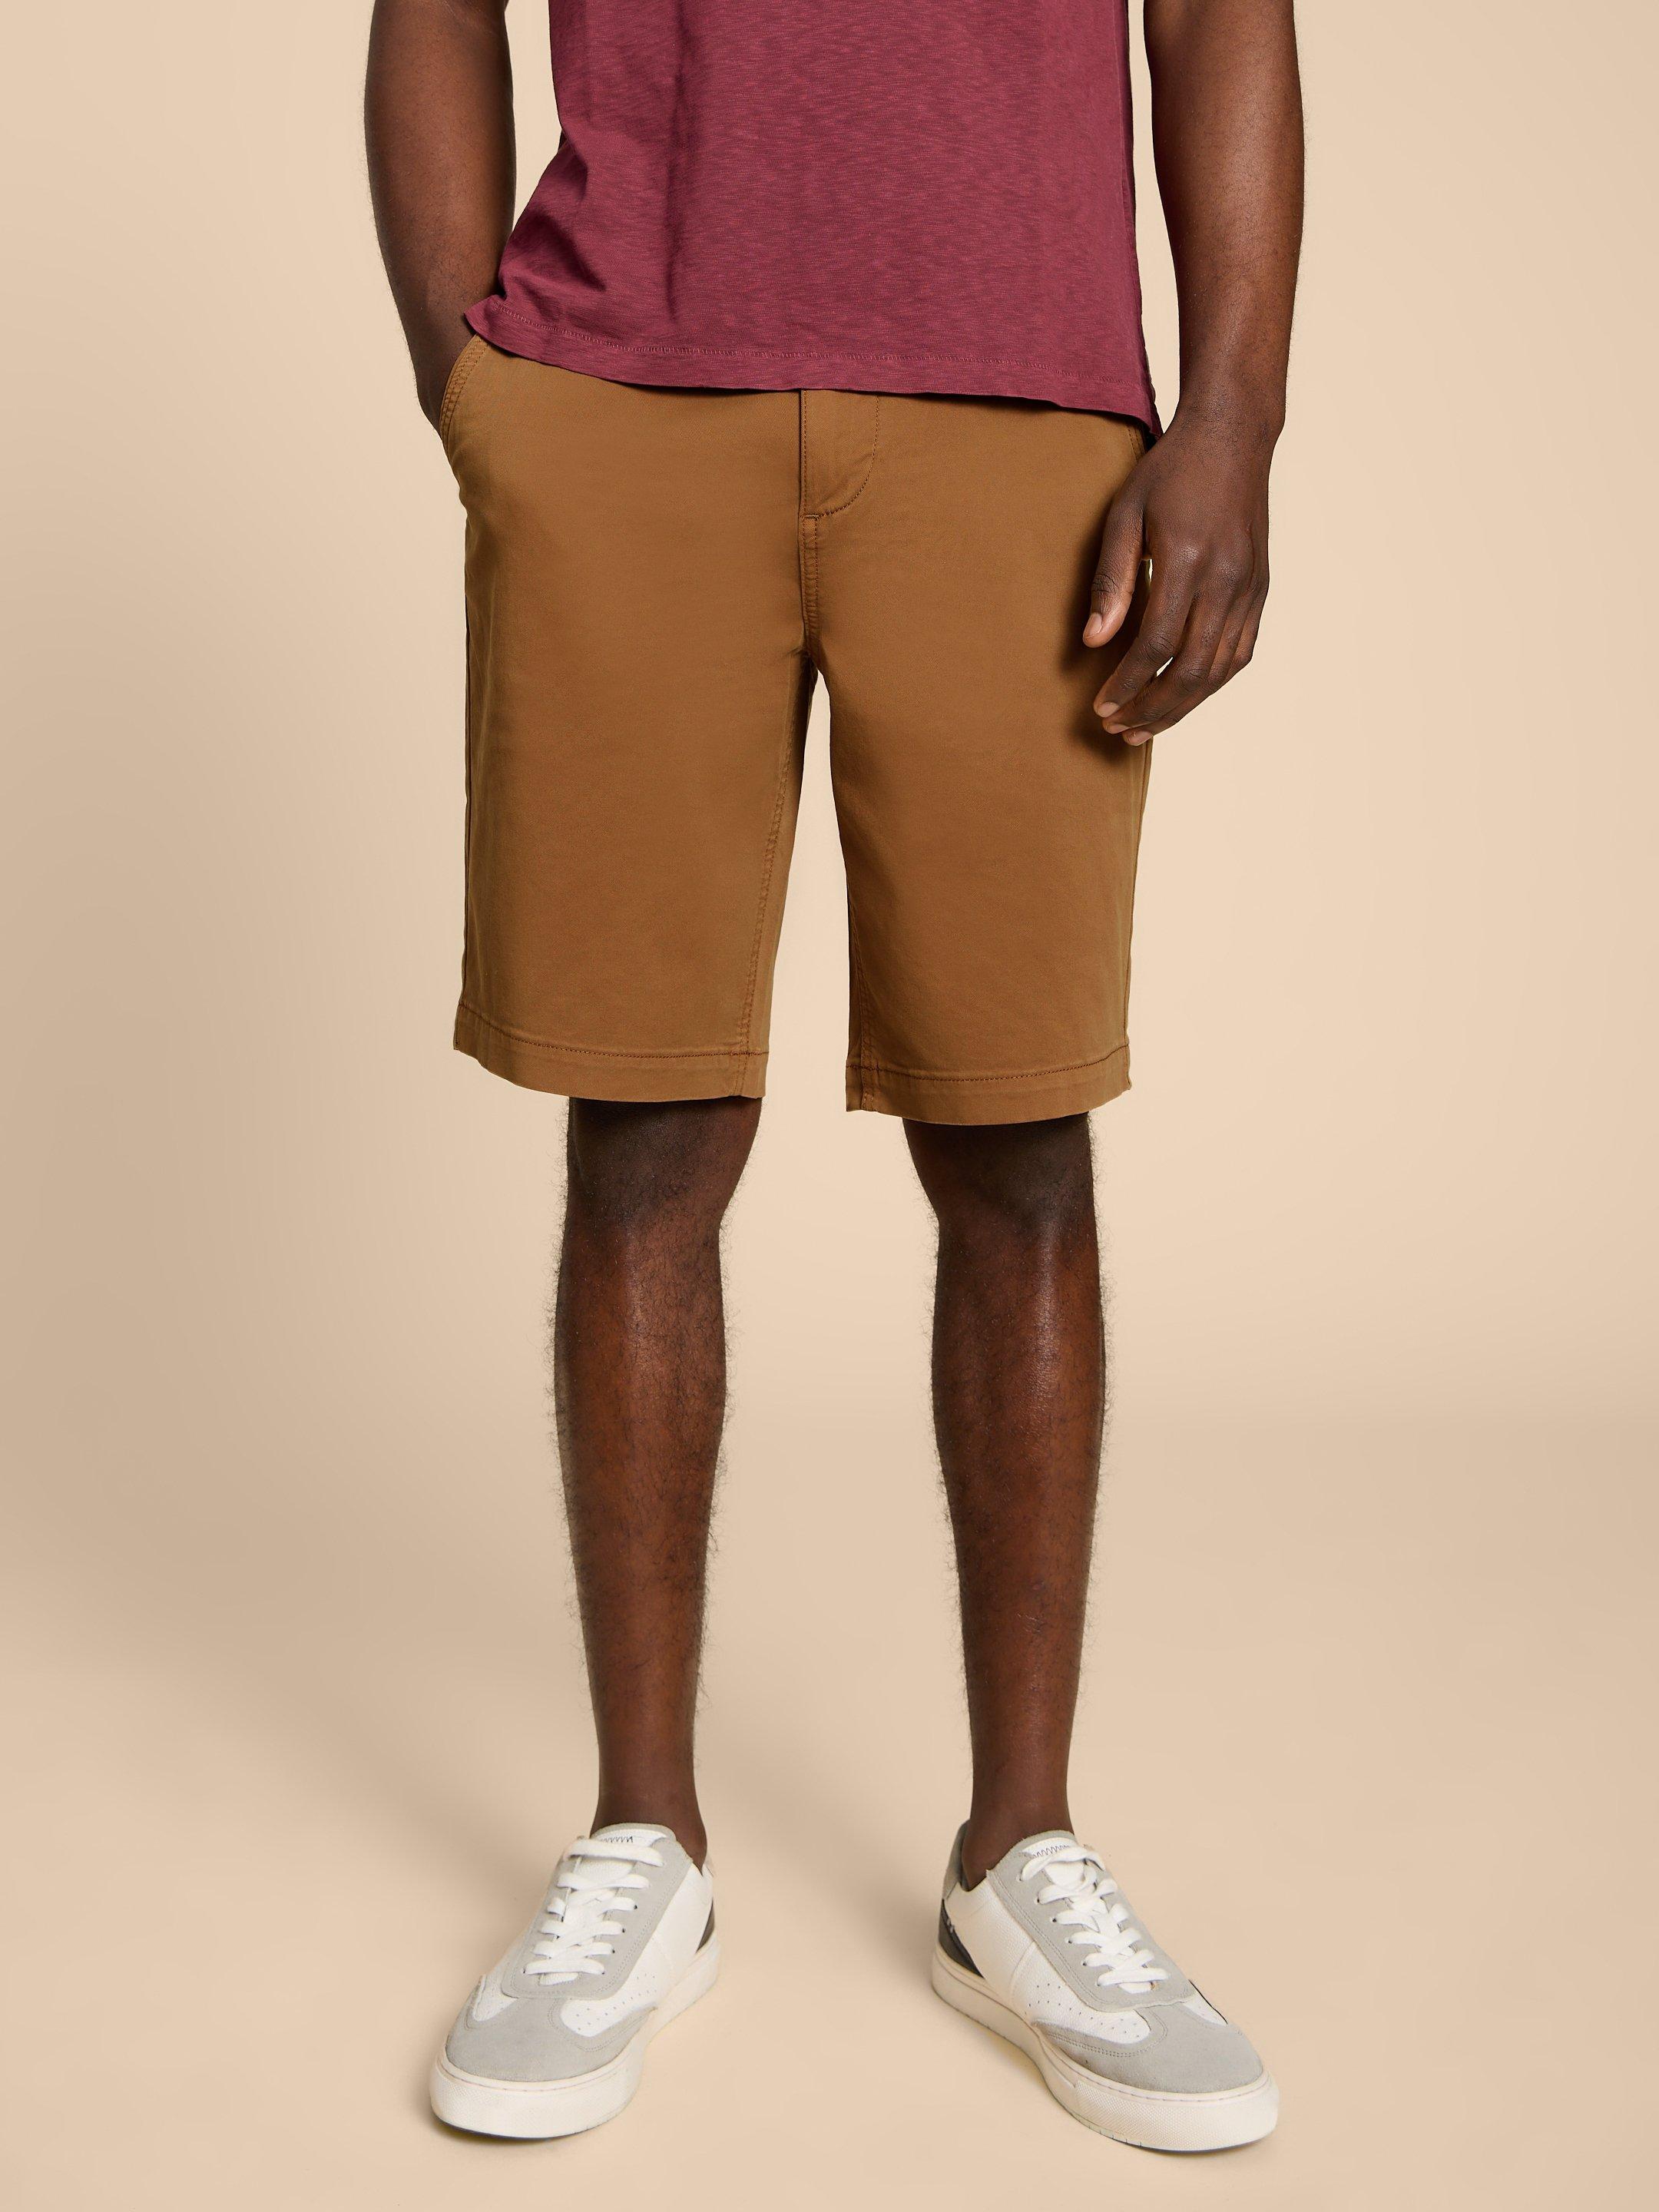 Sutton Organic Chino Short in MID BROWN - MODEL DETAIL